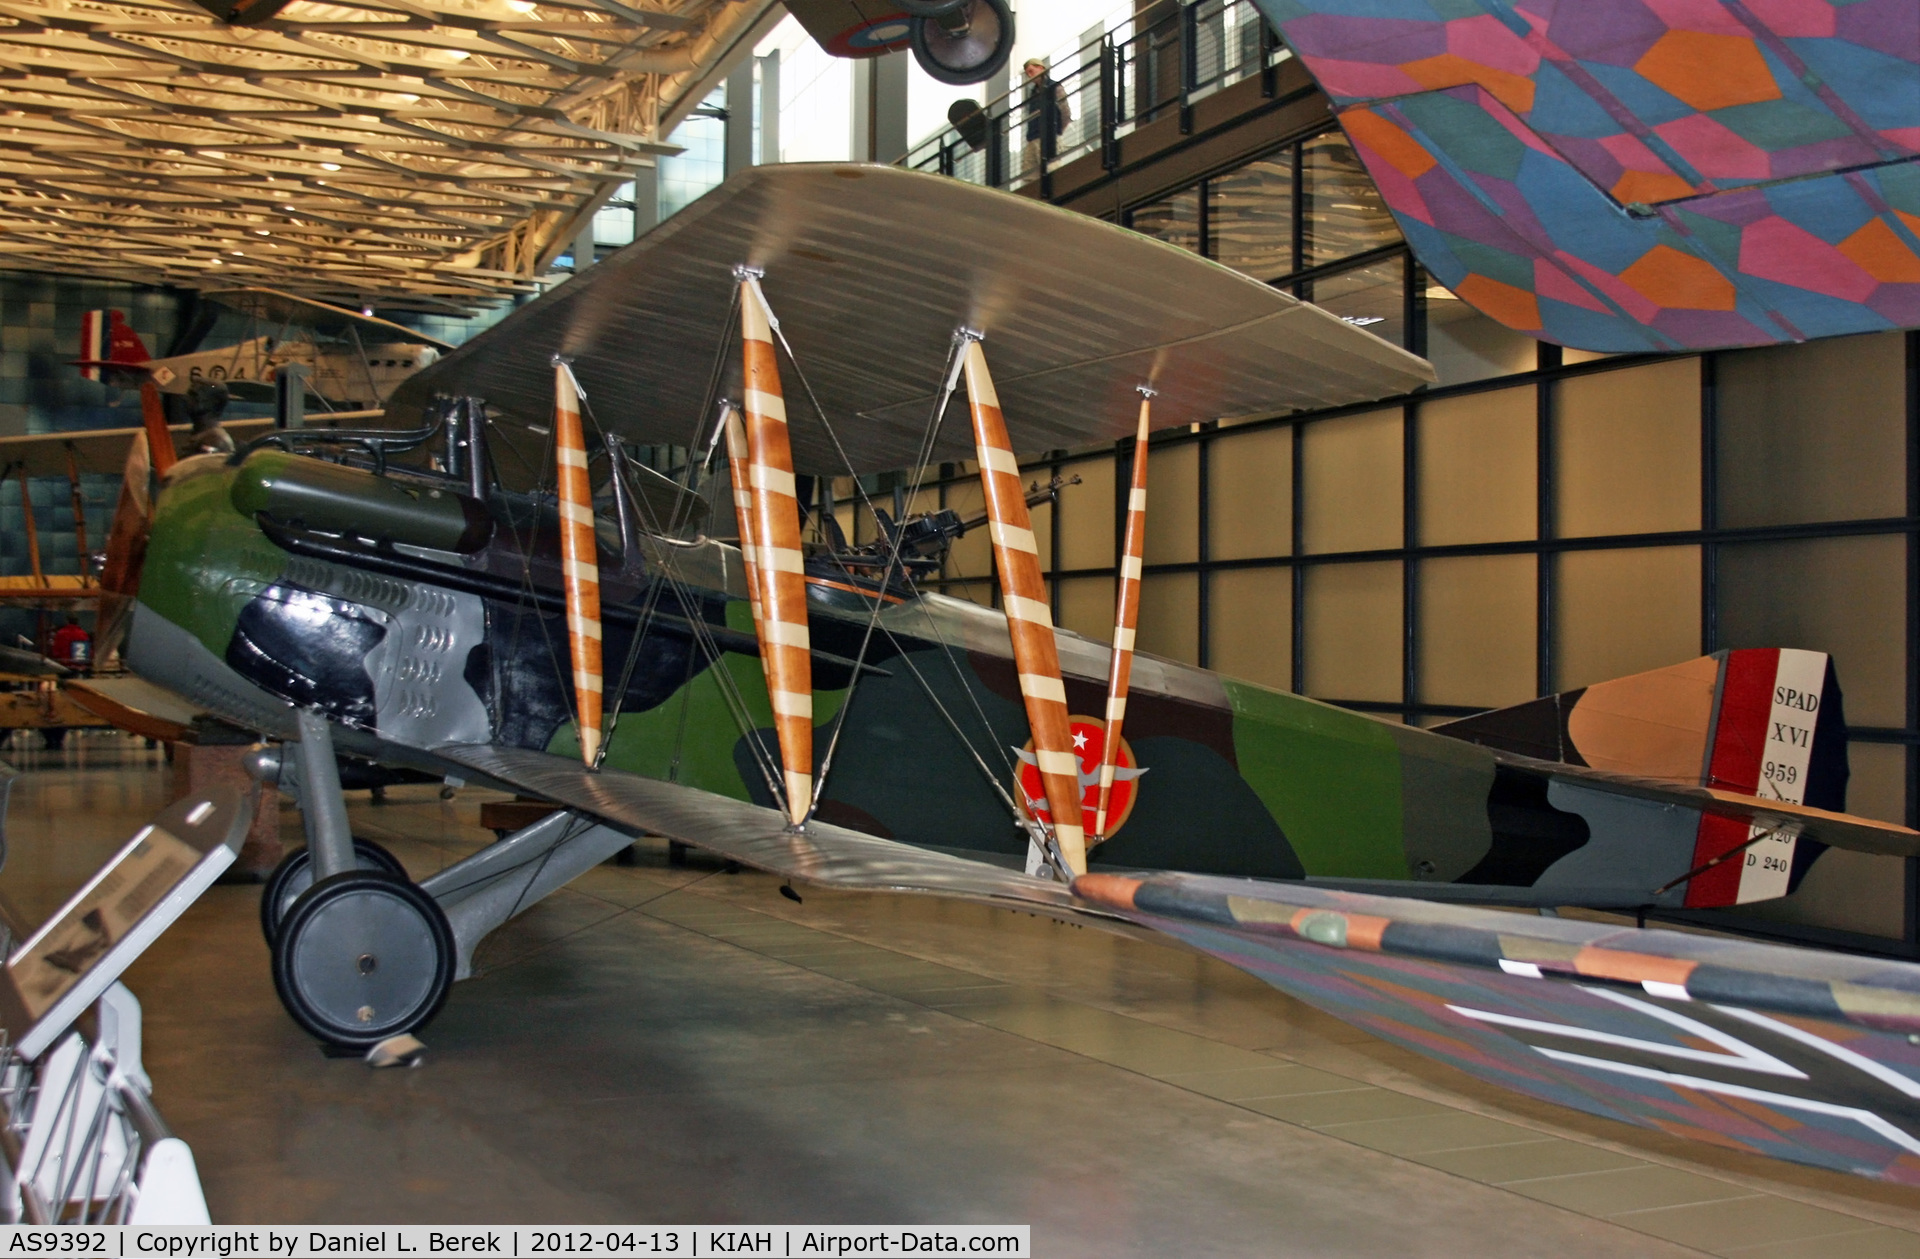 AS9392, 1918 SPAD XVI C/N 959, The model XVI was a two-seat reconnaissance version of the venerable SPAD fighter.  Though this was an undistinguished aircraft, the particular example is noteworthy as General Billy Mitchell piloted the machine at the end of WWI.